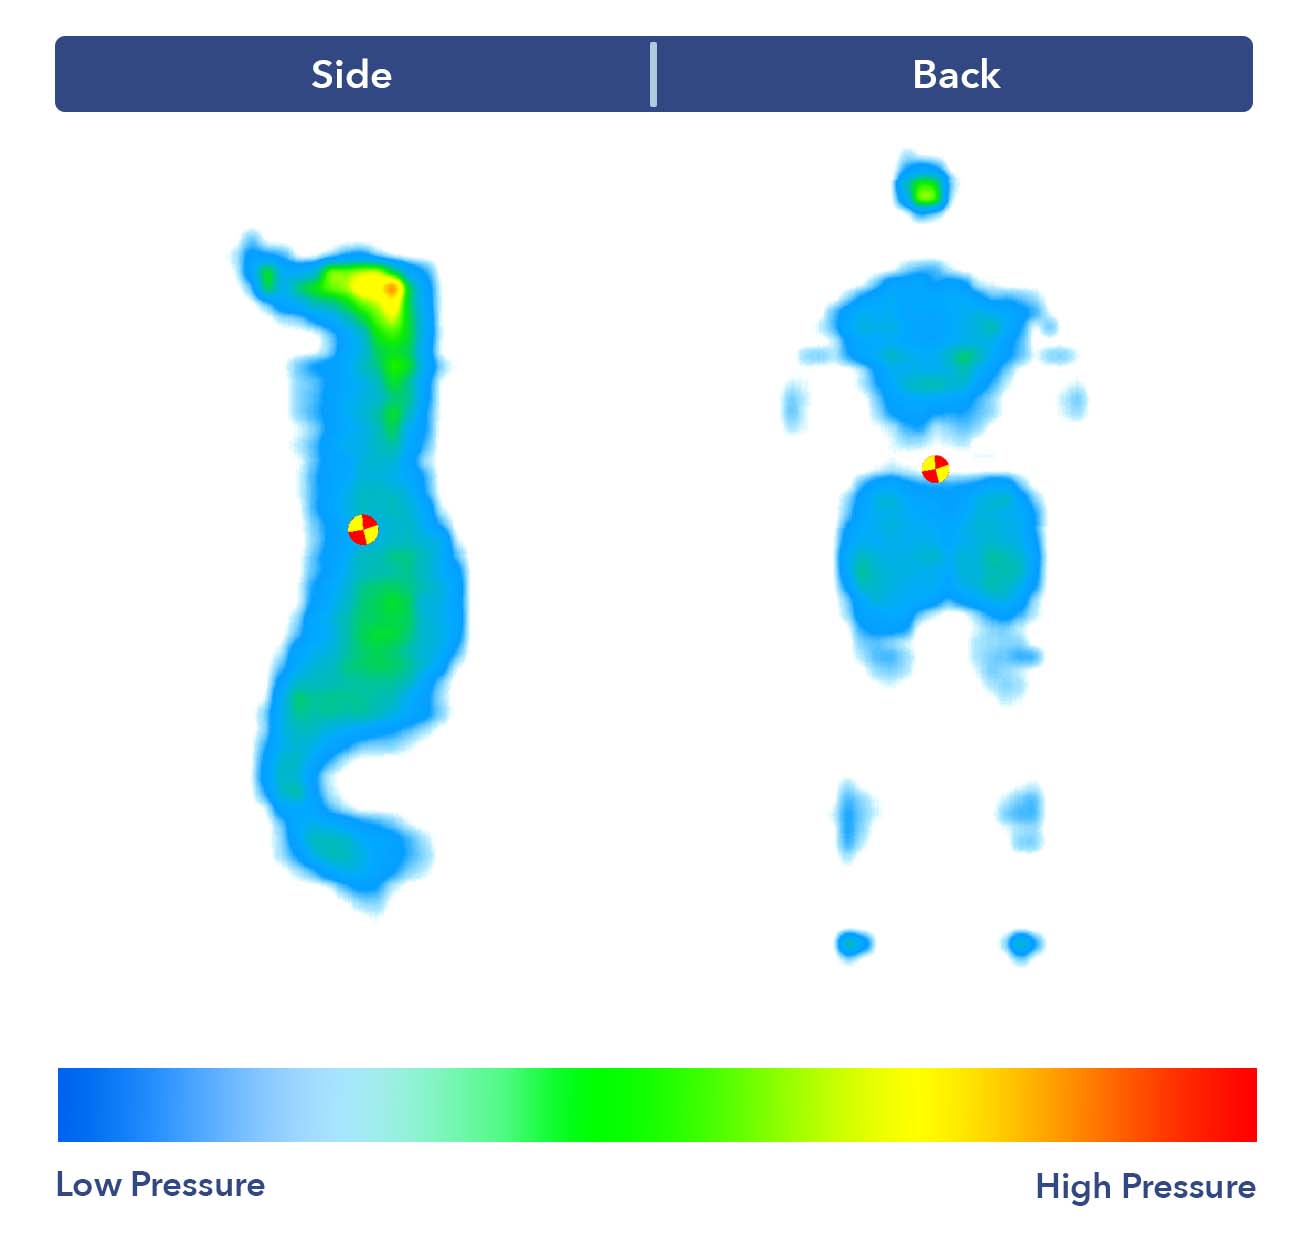 Pressure map results from the Propel Hybrid firm side